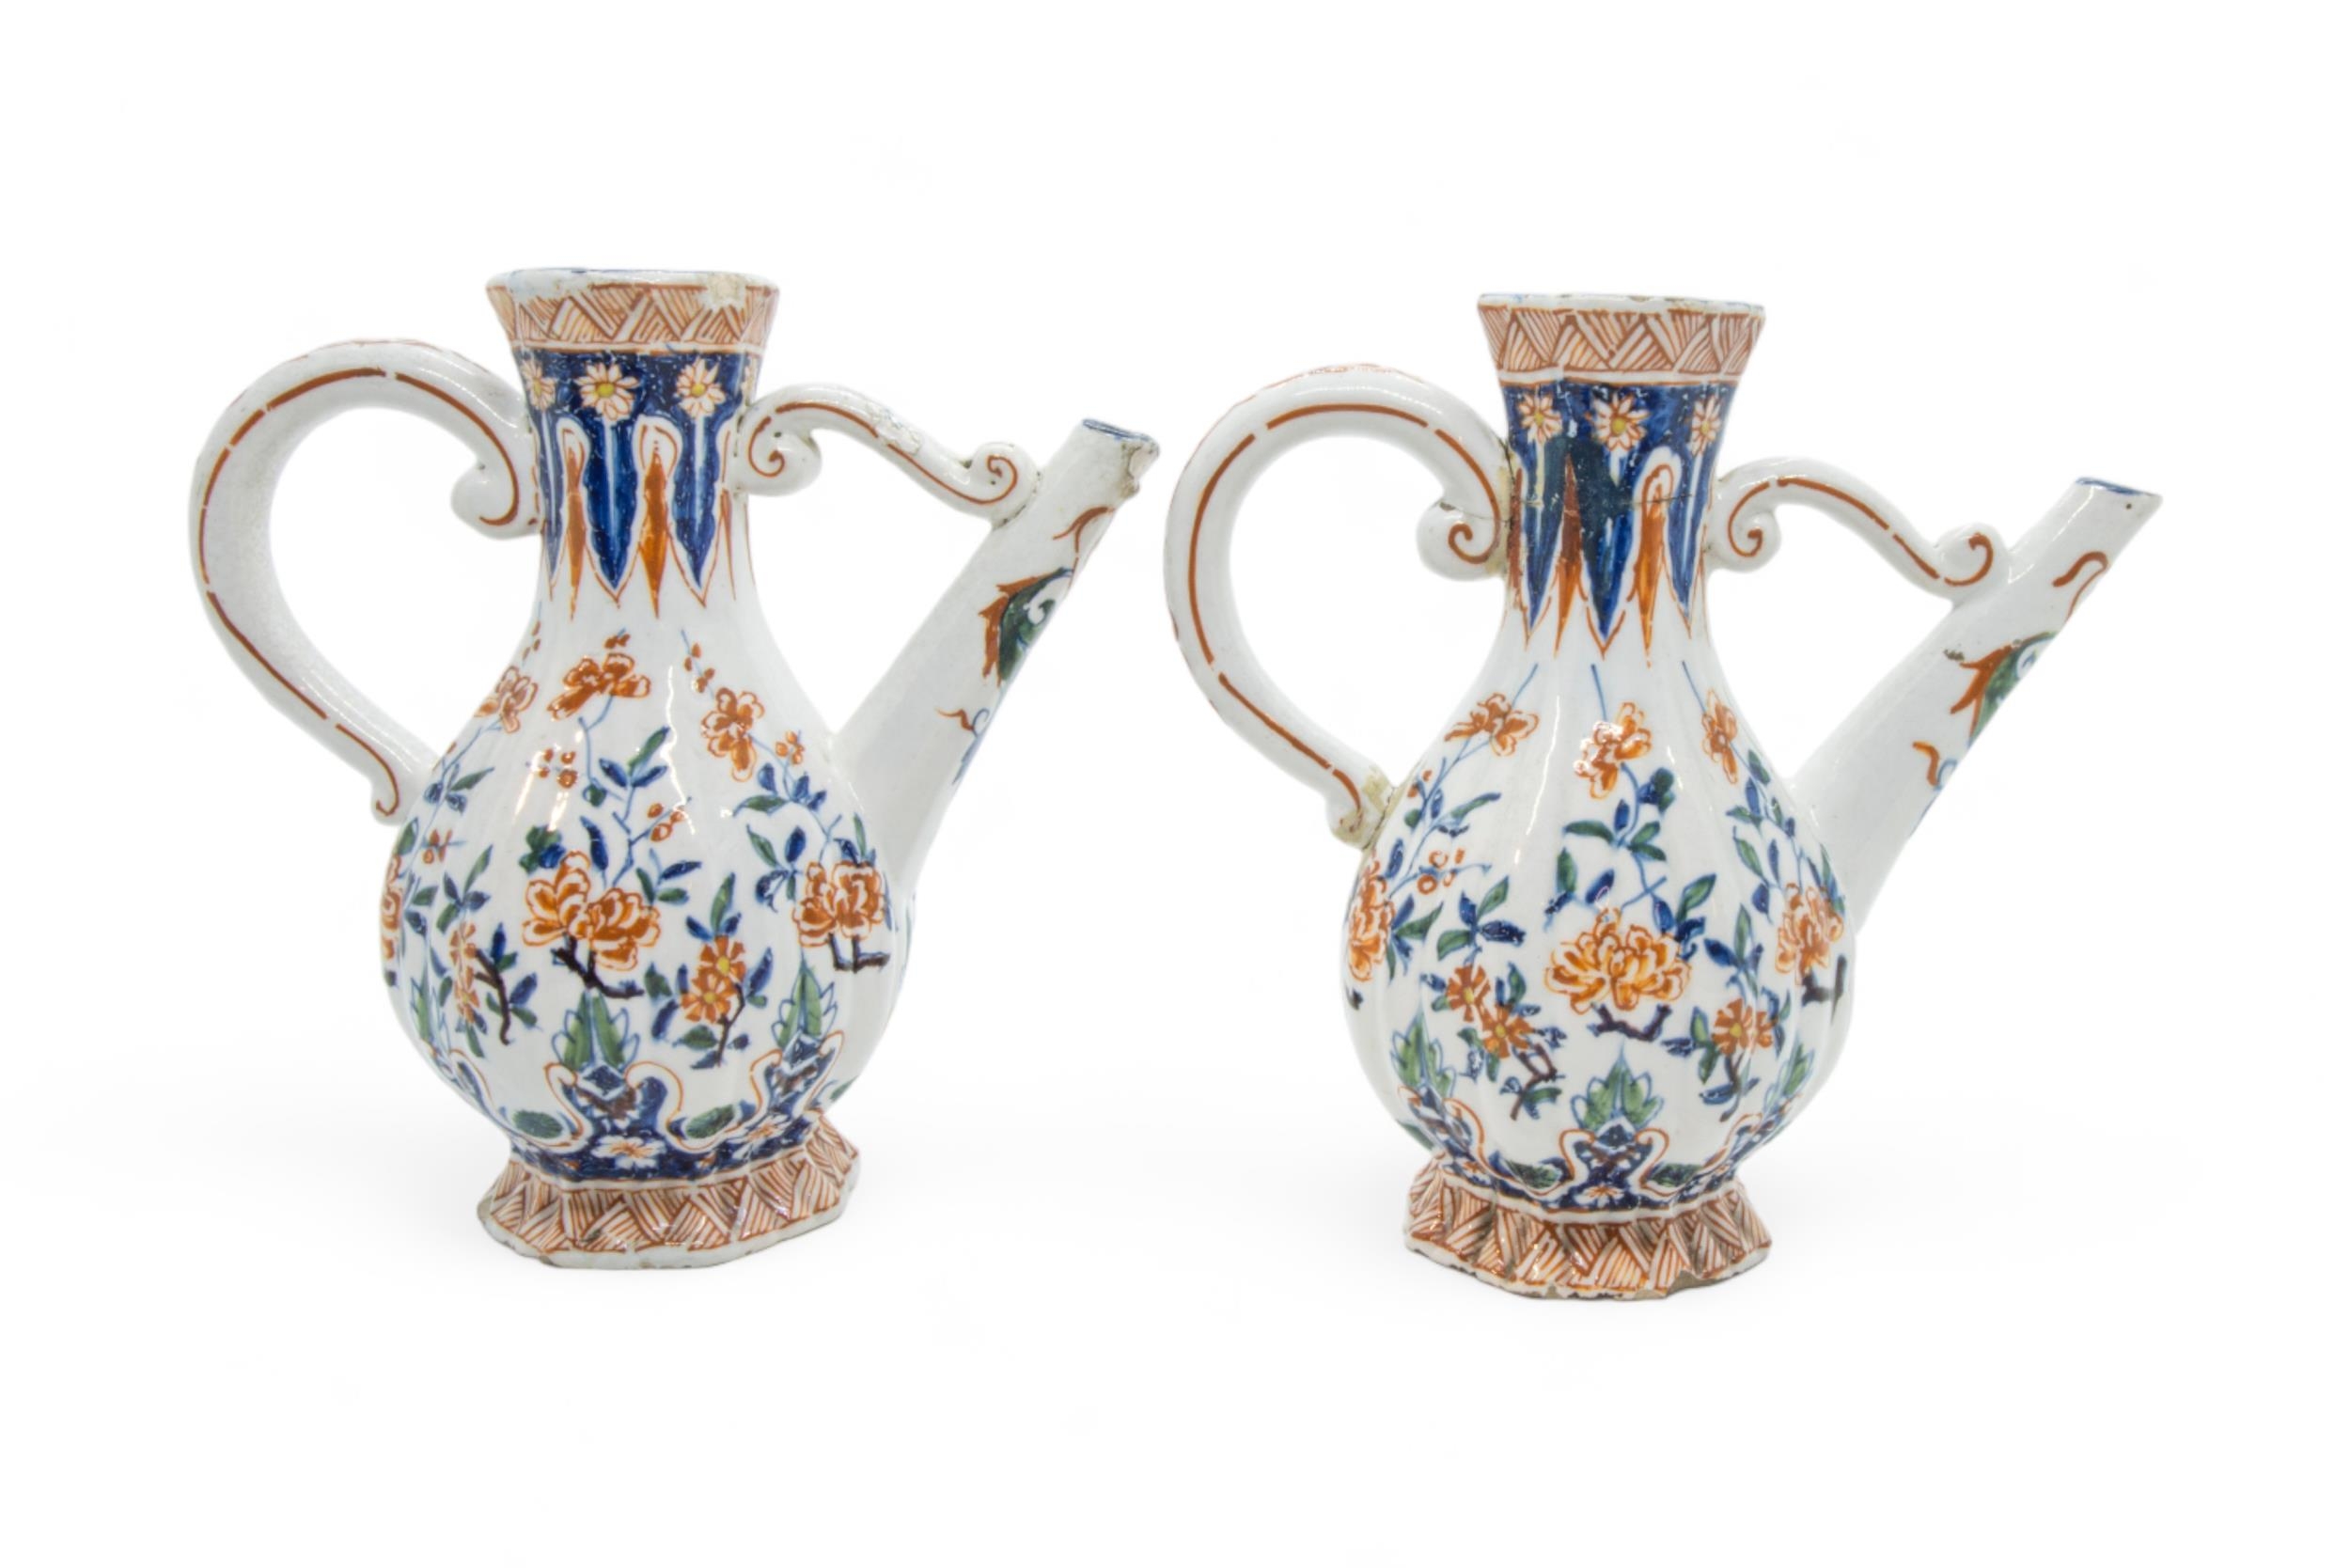 DE ROOS DELFT, A CONDIMENT SET ON STAND 18th / 19th century, 16.5cms high - Image 3 of 3